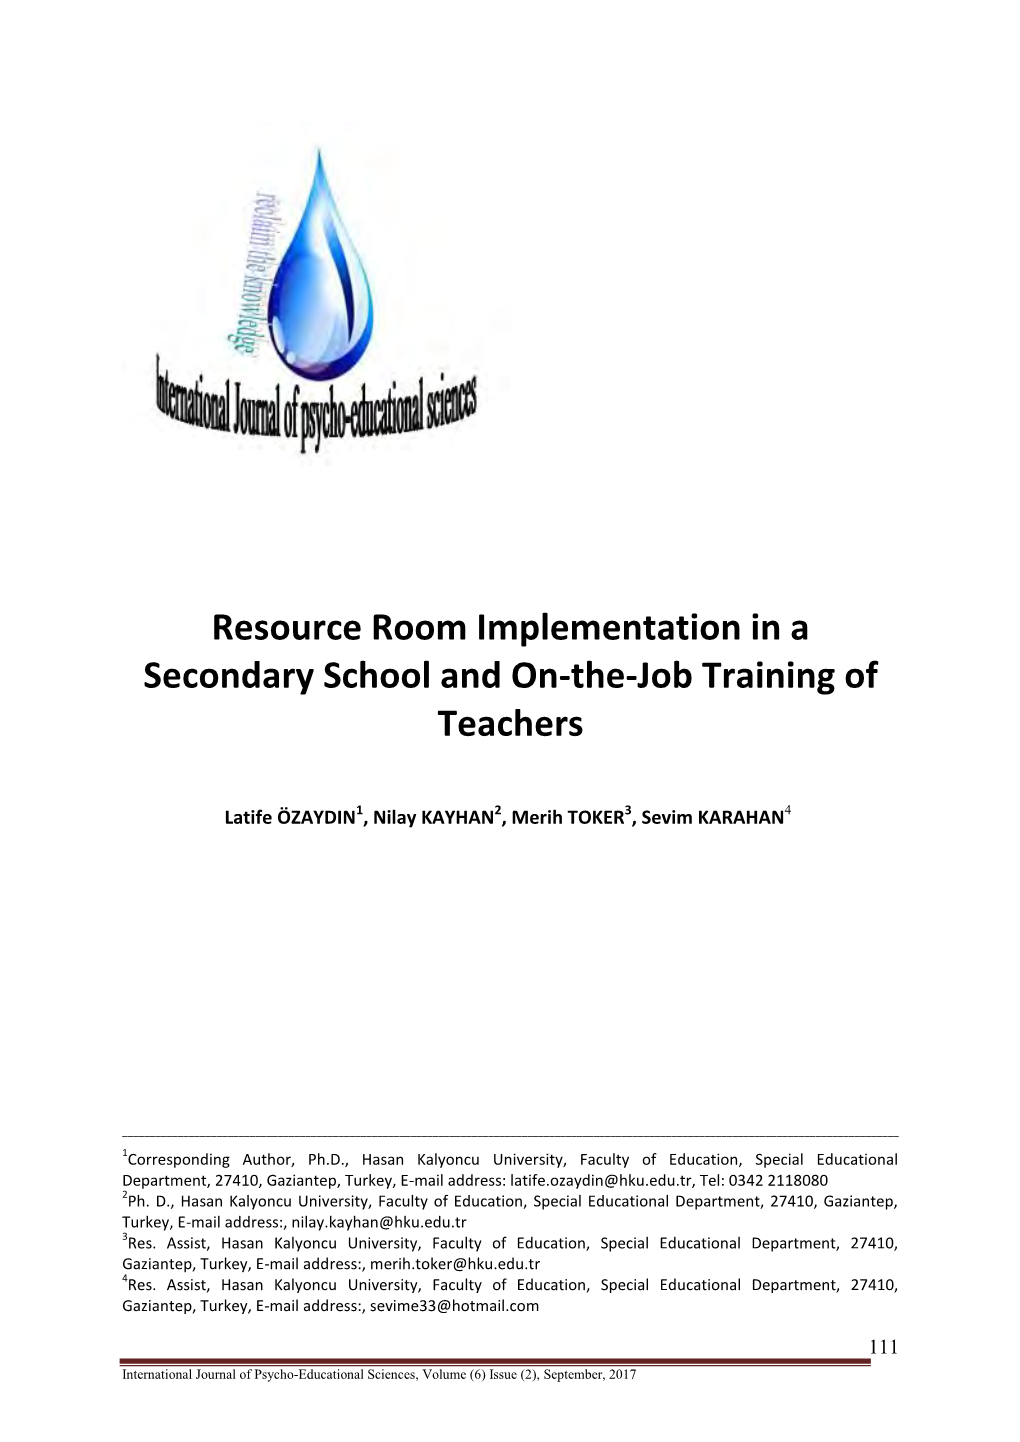 Resource Room Implementation in a Secondary School and On-The-Job Training of Teachers